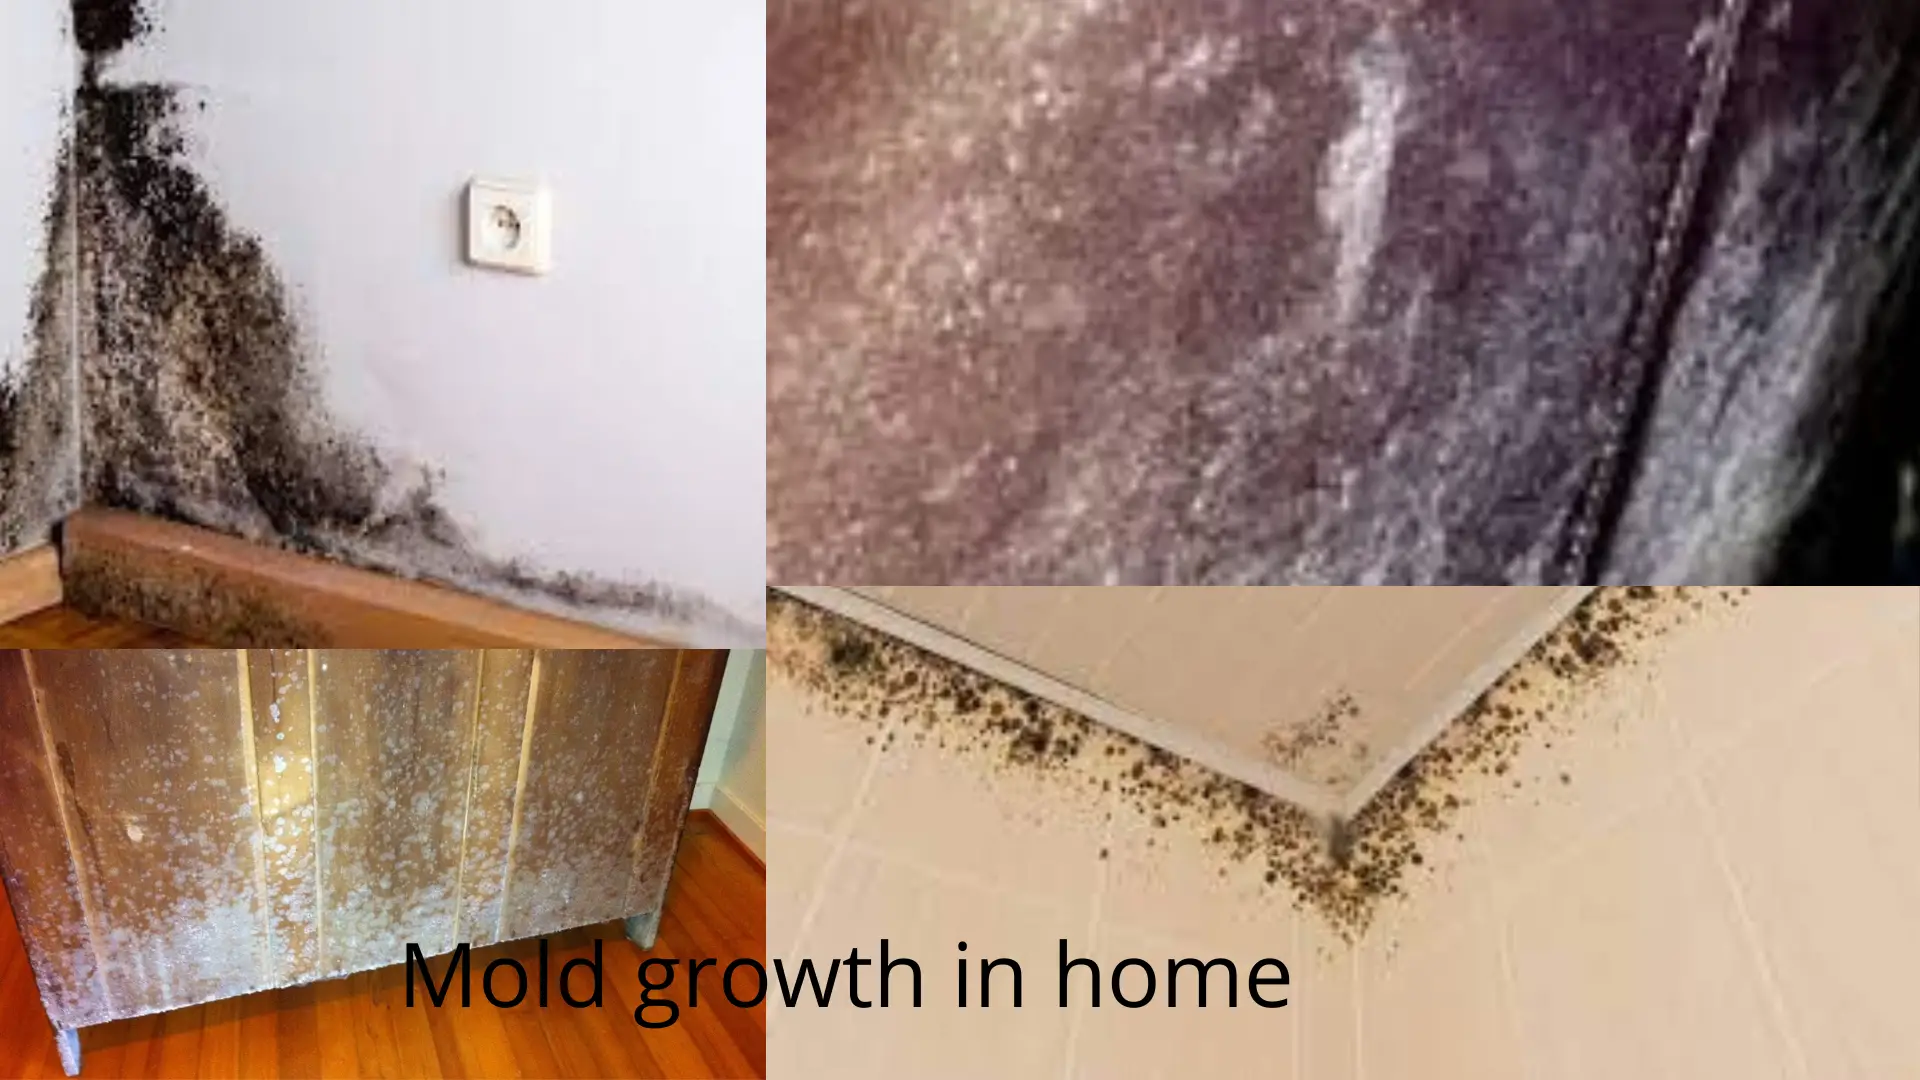 Mold Growth in Home: Signs, Risk, and Solution